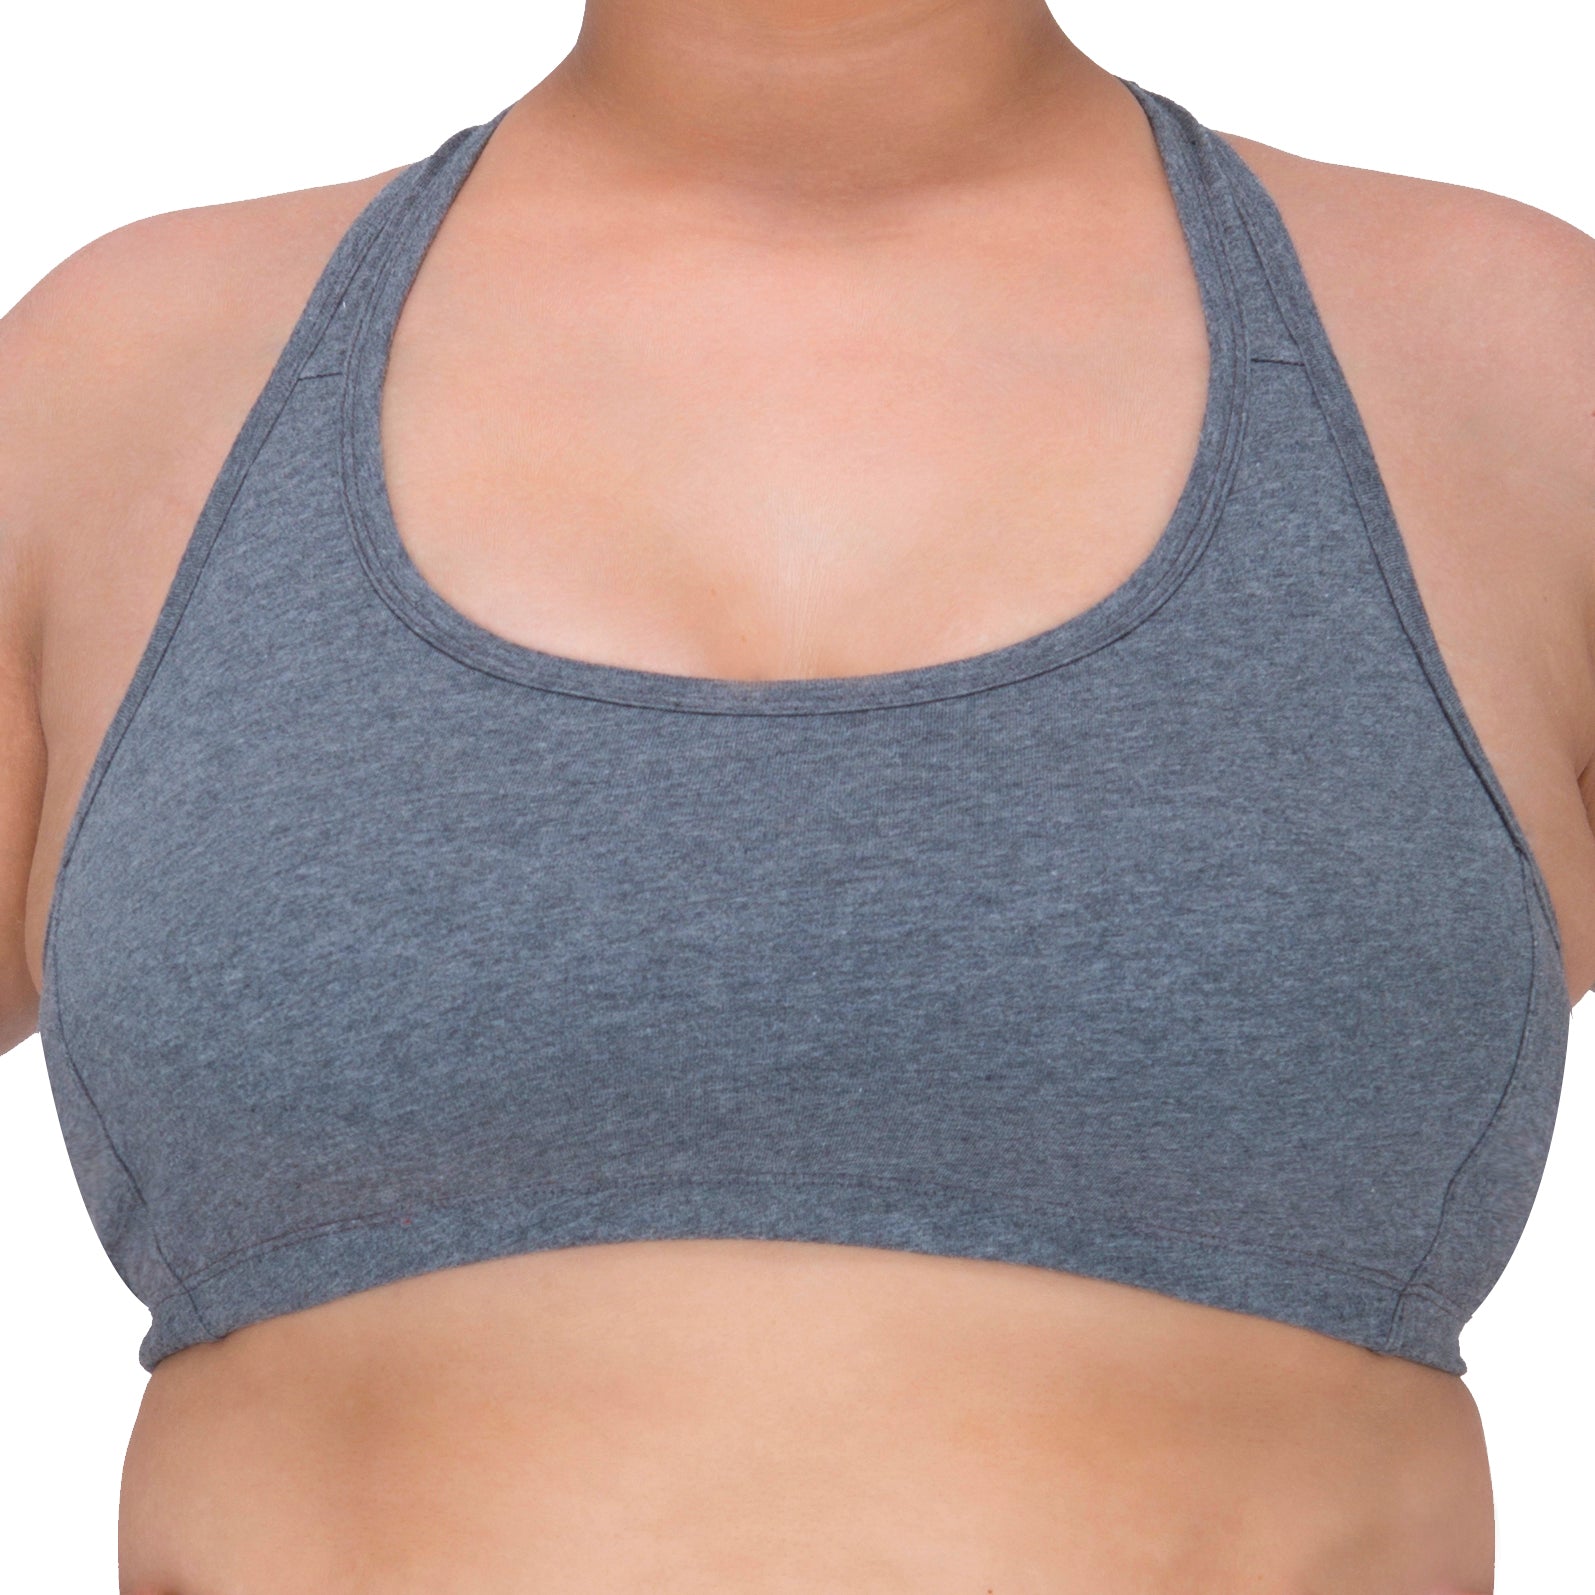 4 Factors to Consider when Choosing the Right Bra for Hiatal